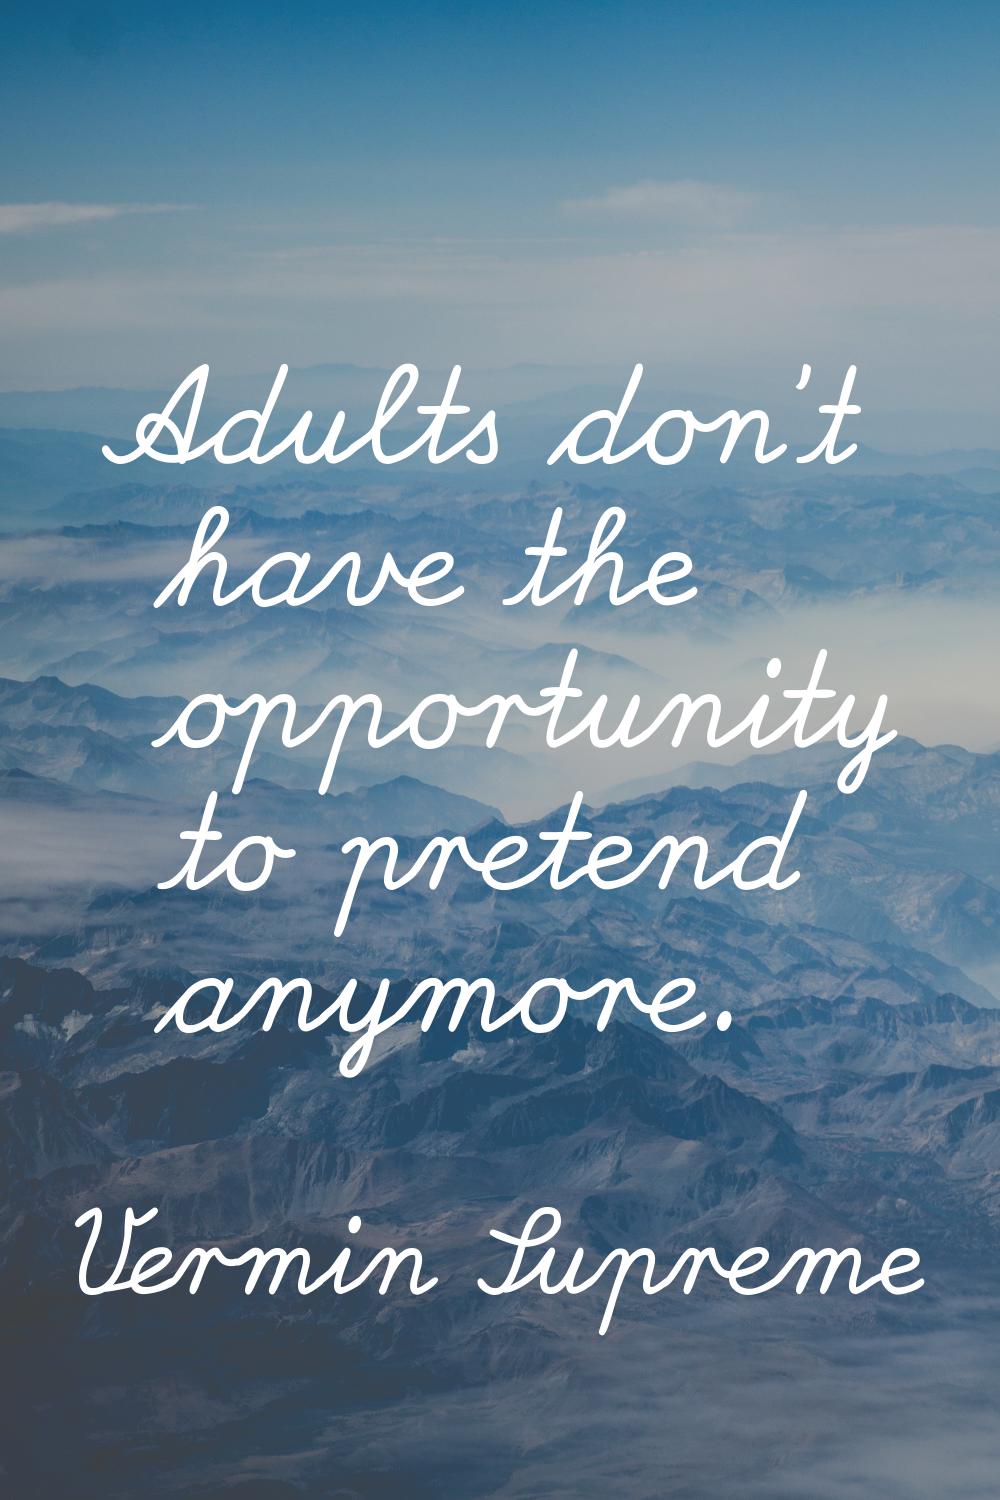 Adults don't have the opportunity to pretend anymore.